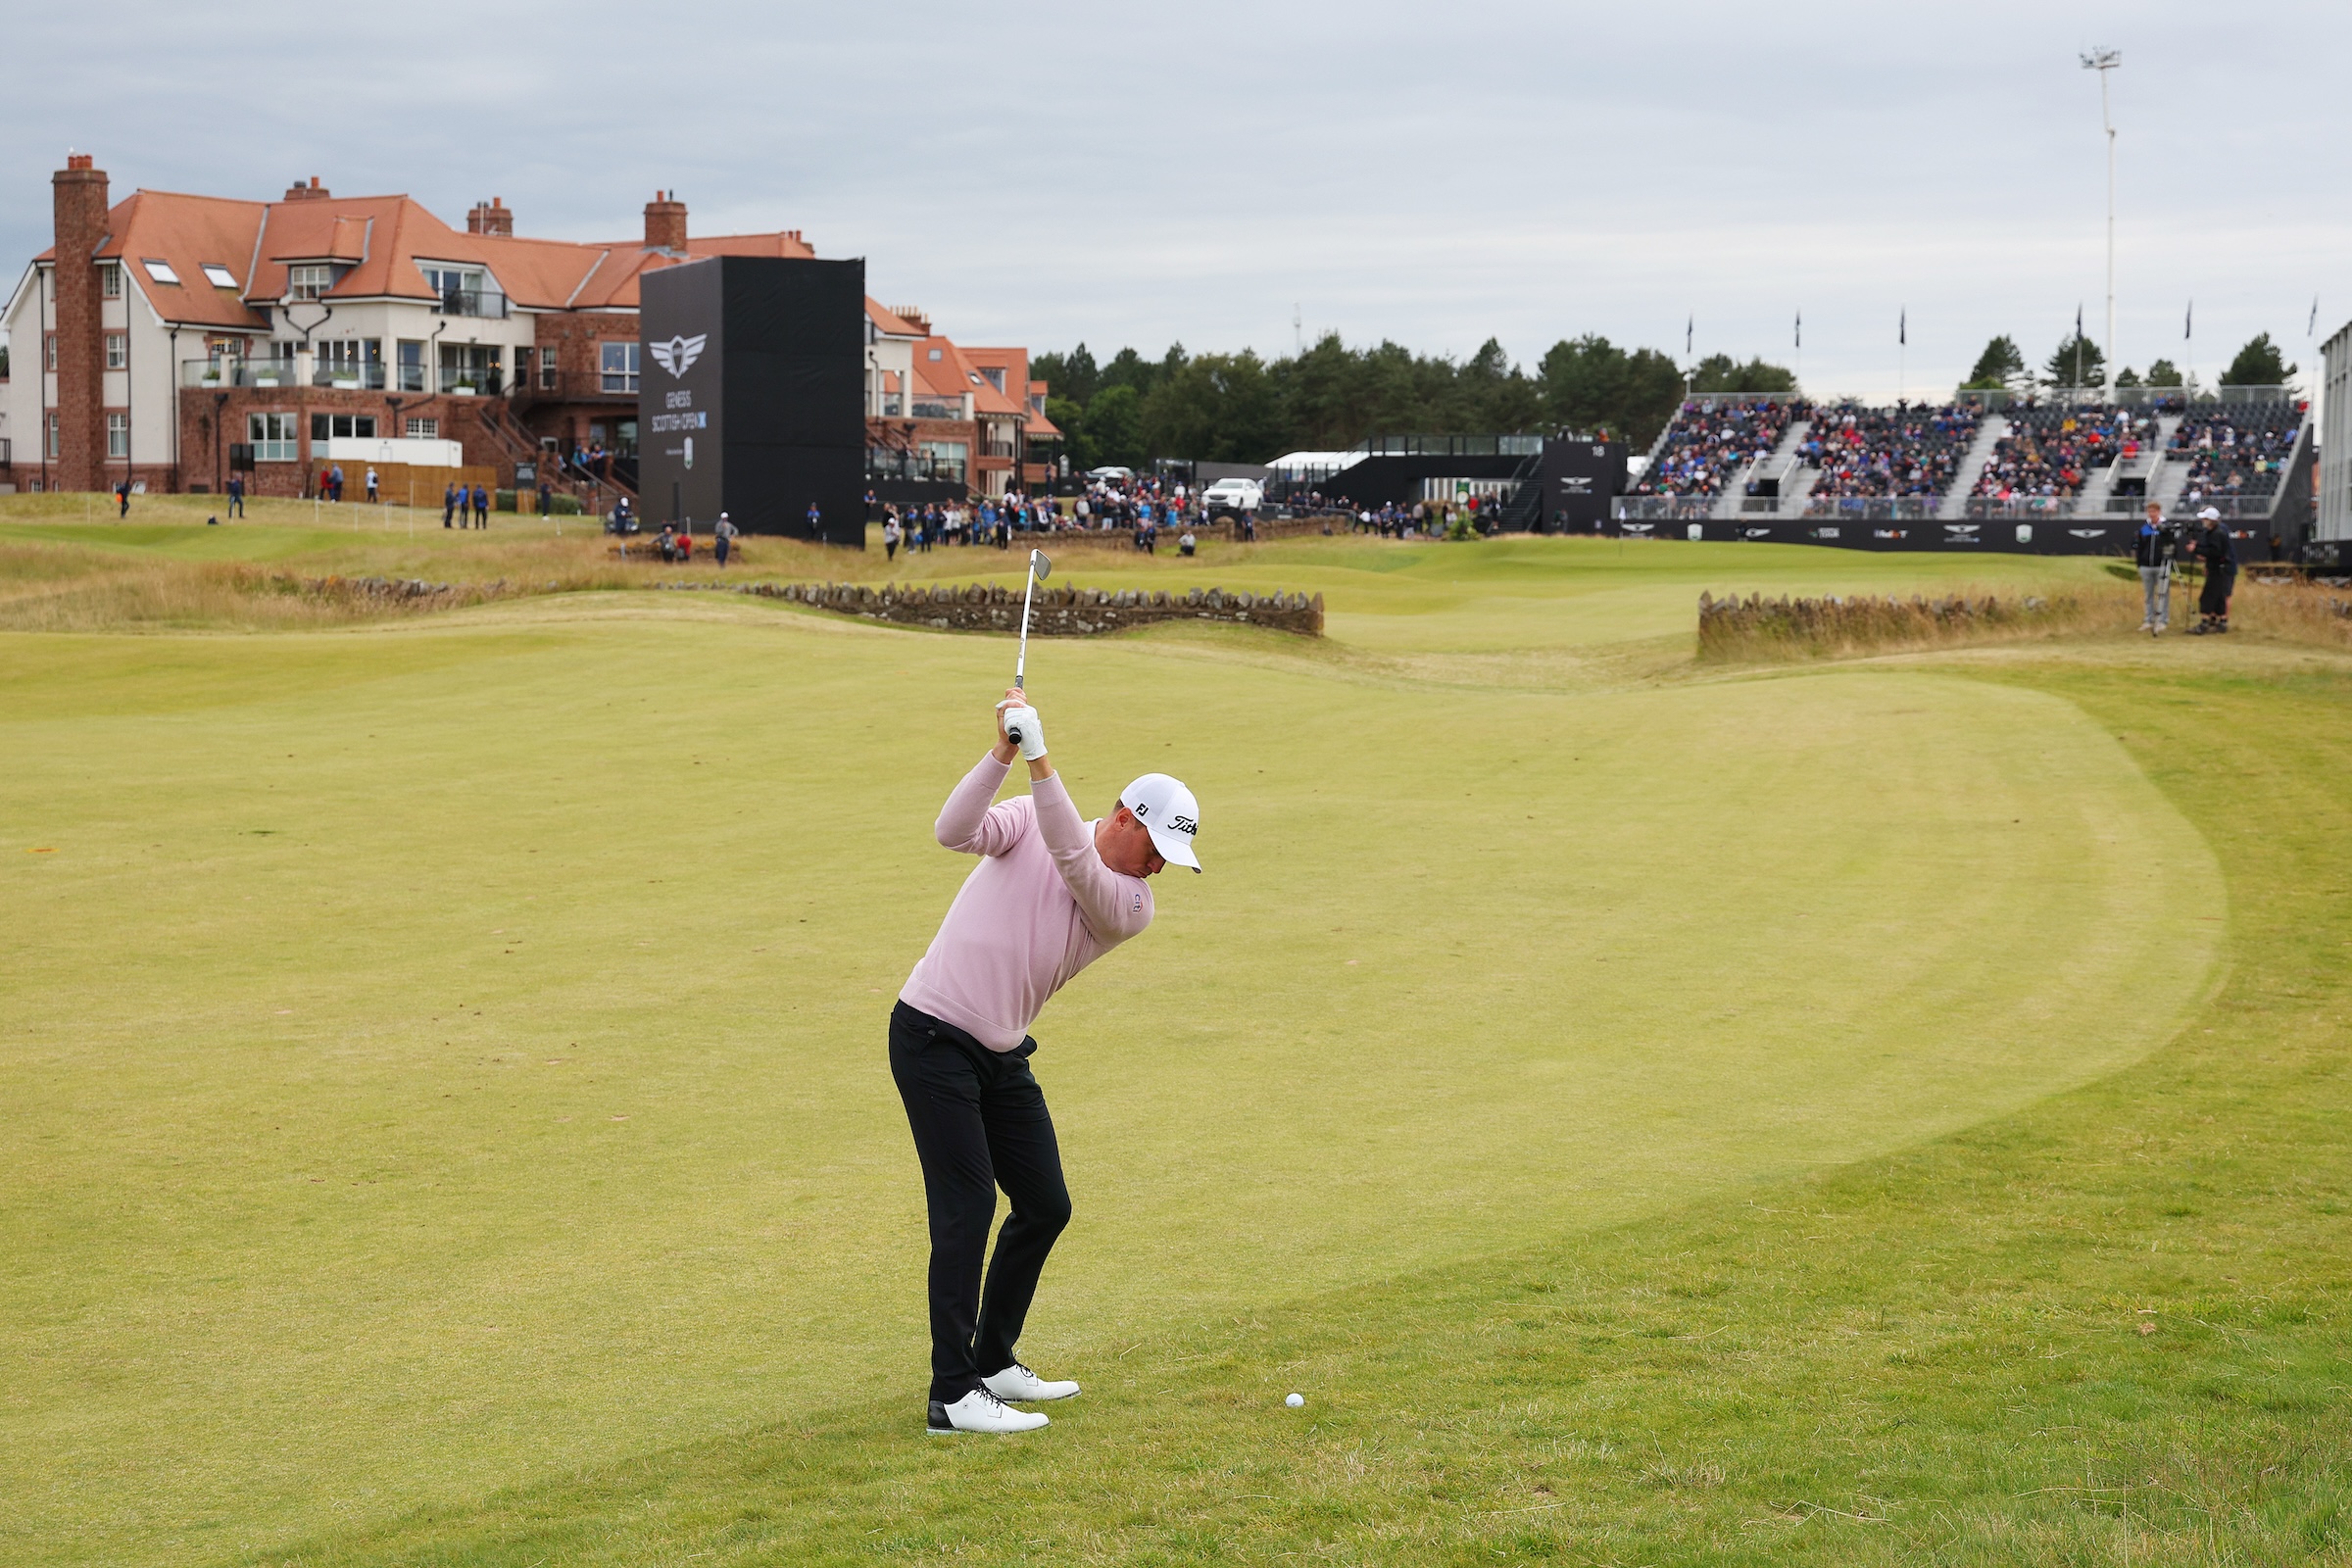 Justin Thomas of the United States plays his second shot on the 18th hole during day one of the Genesis Scottish Open at The Renaissance Club